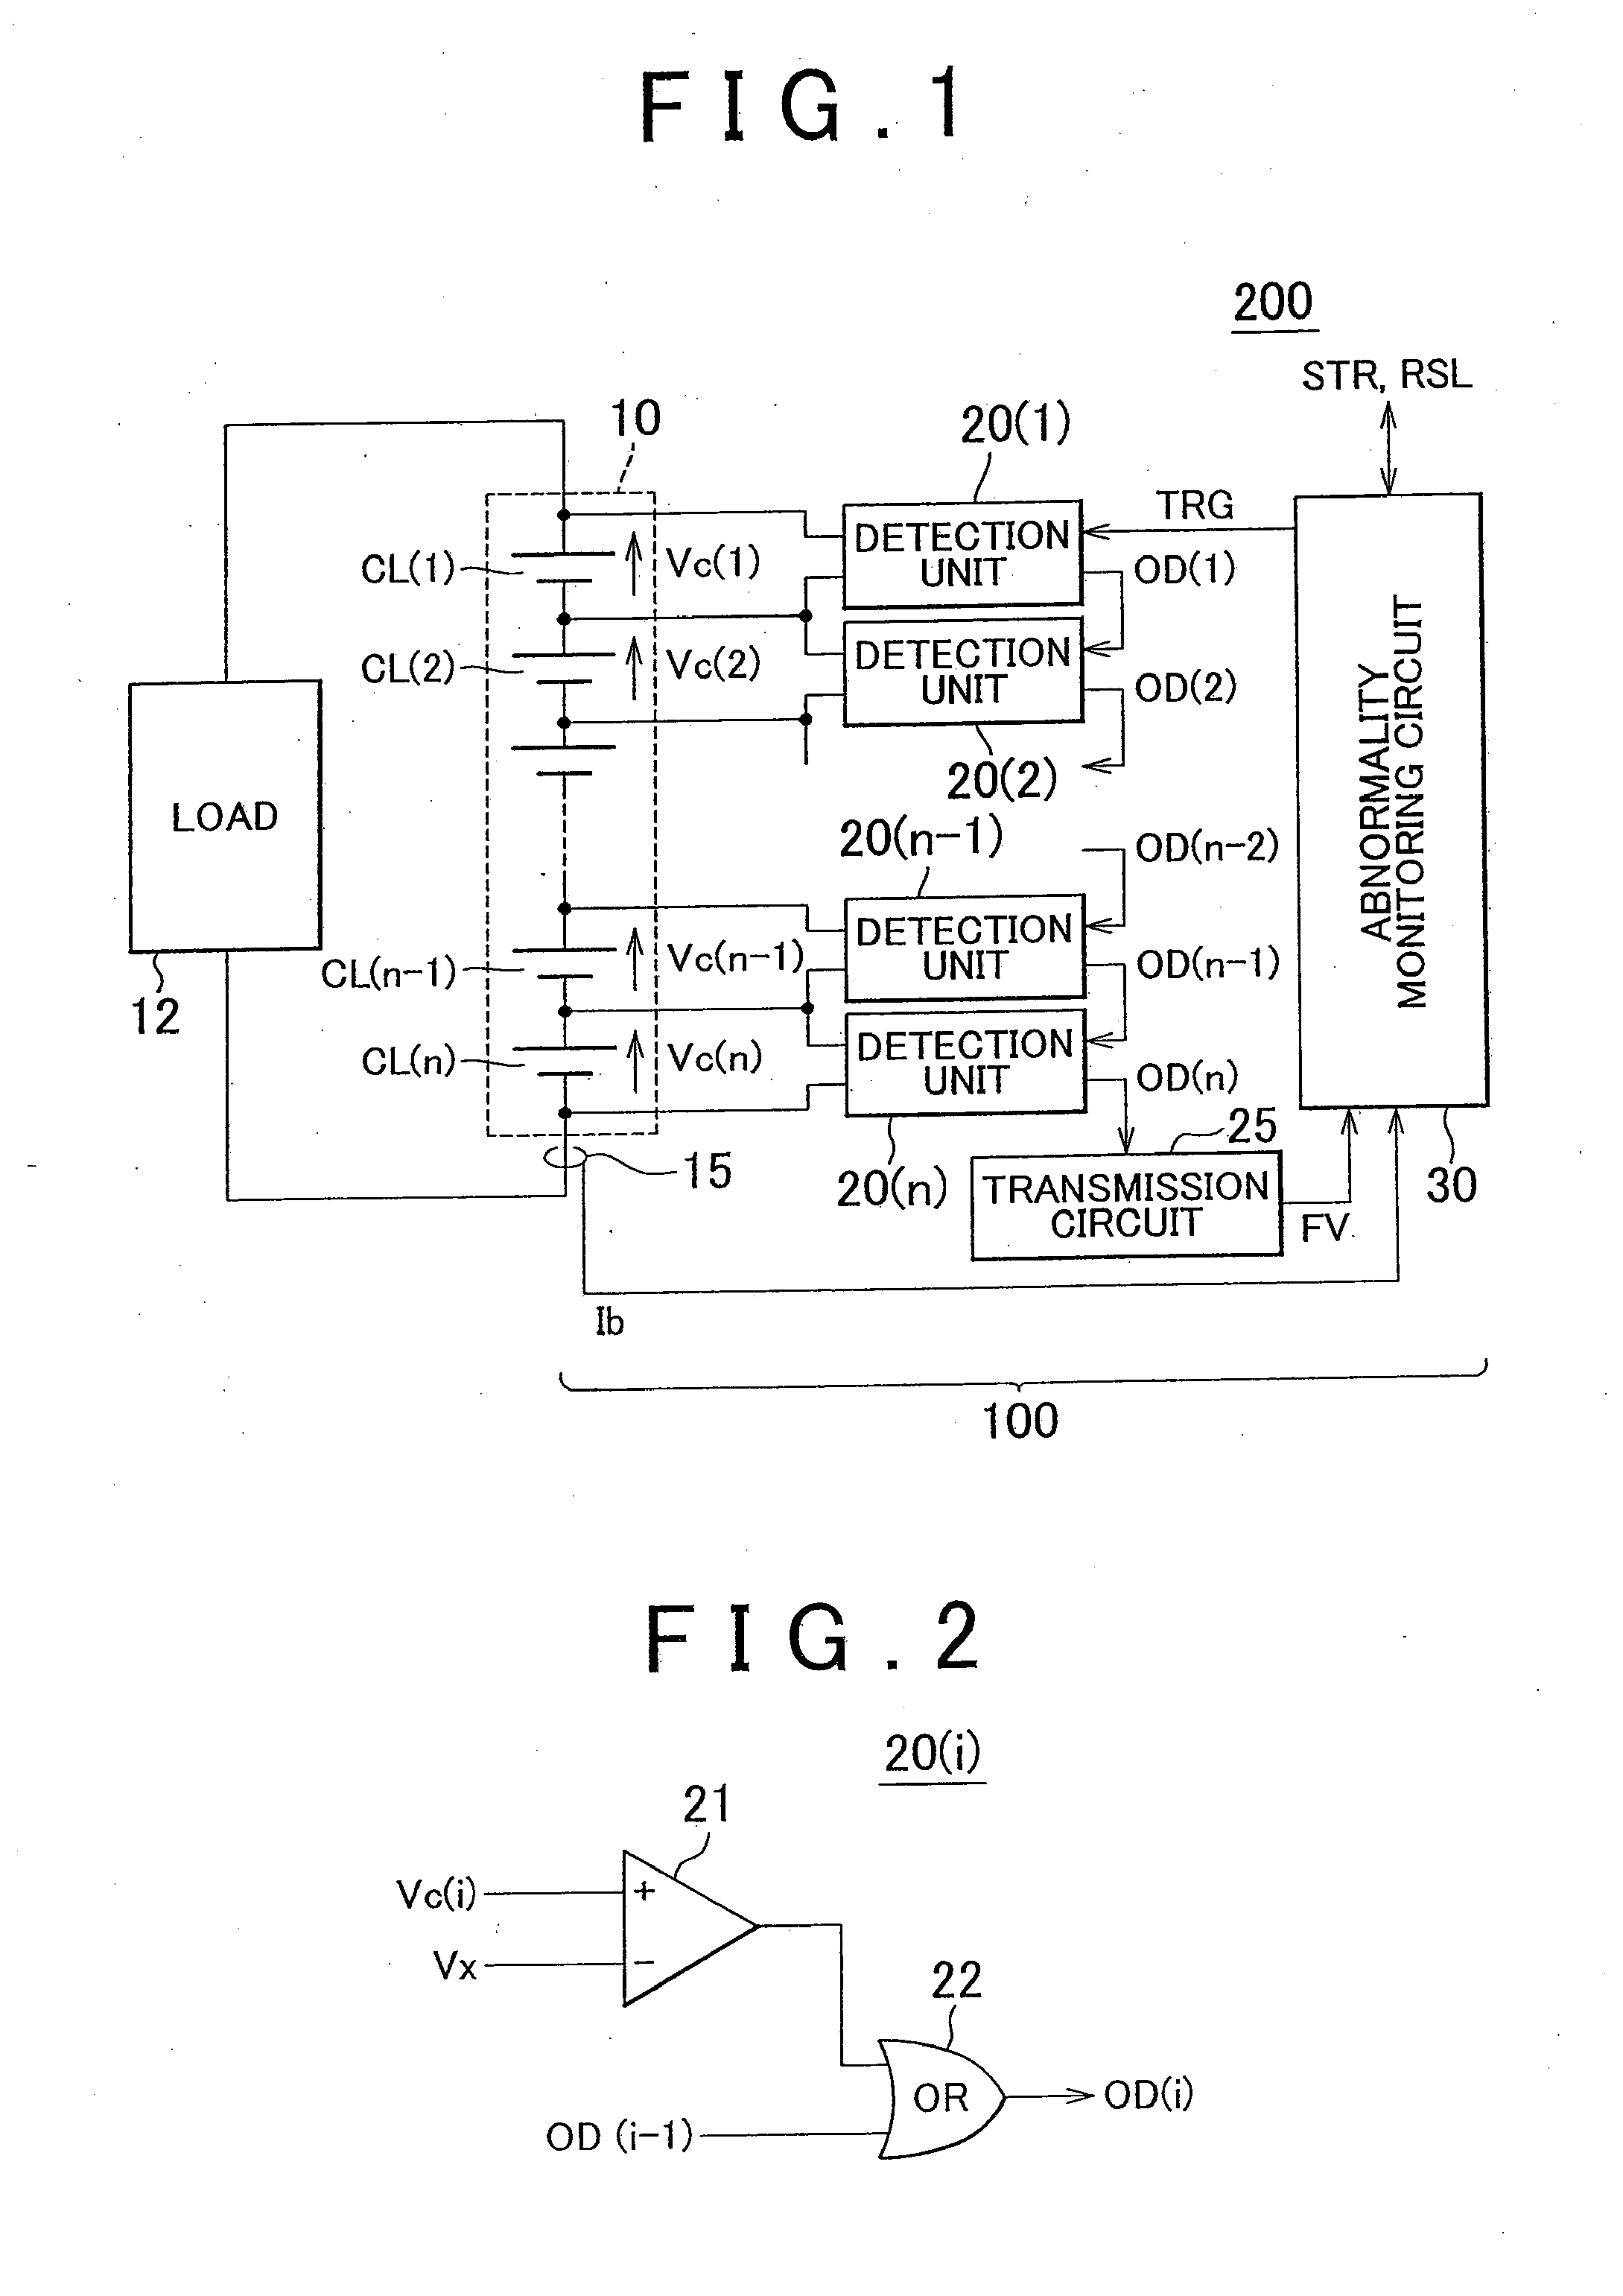 Abnormality detecting system for battery assembly